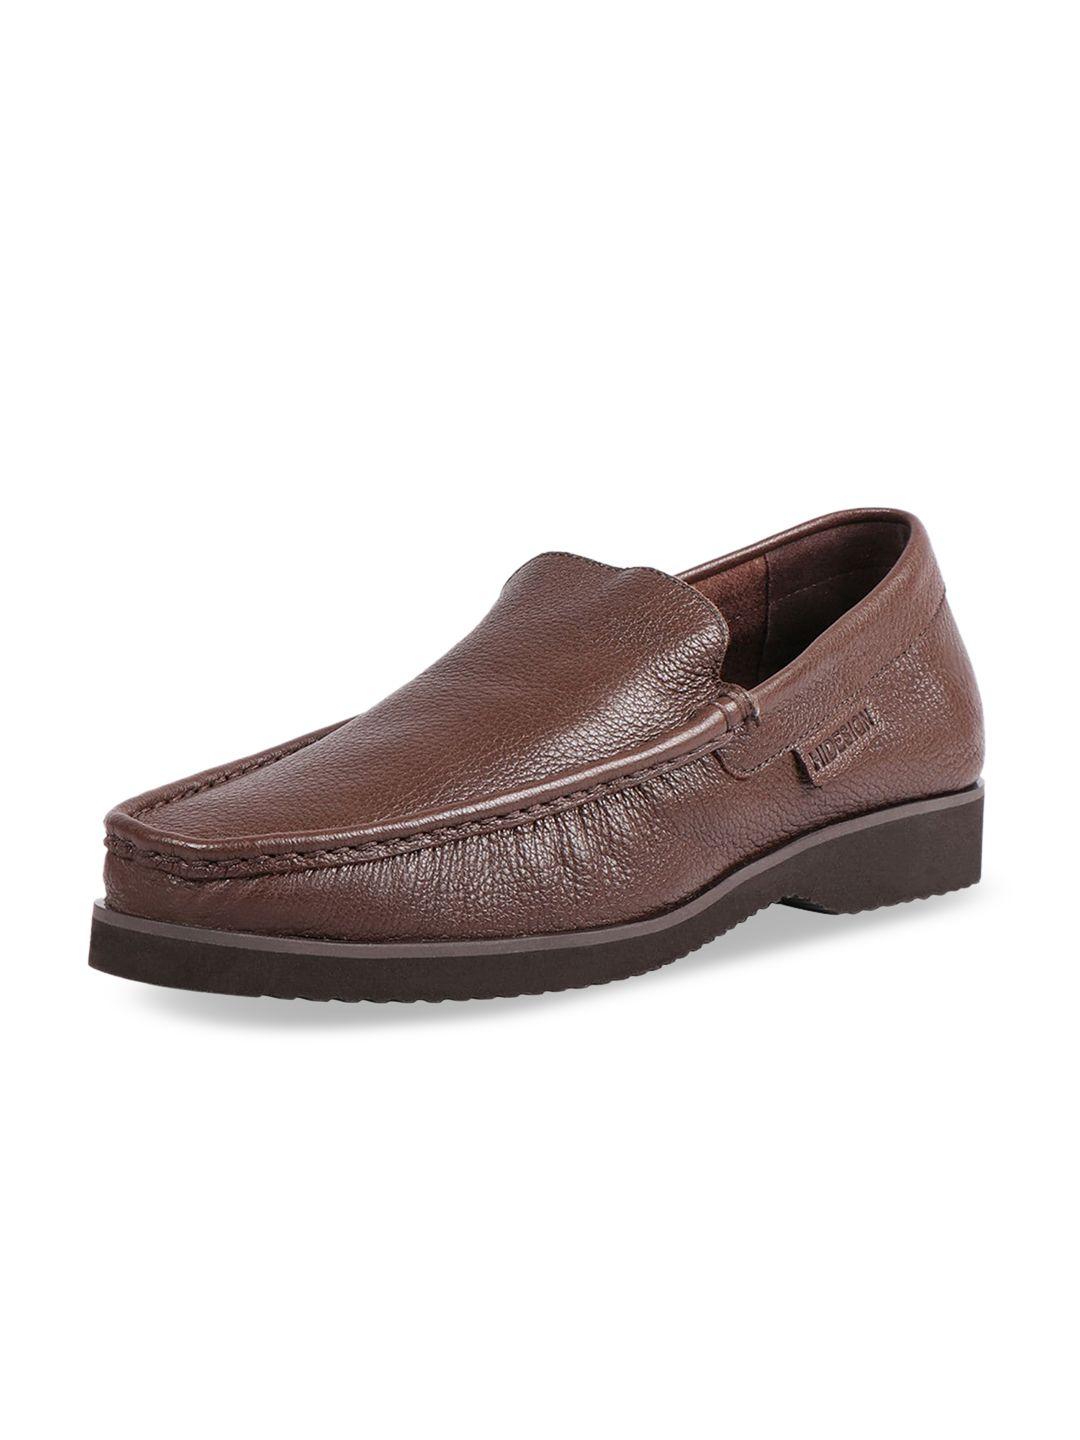 hidesign-men-brown-leather-loafers